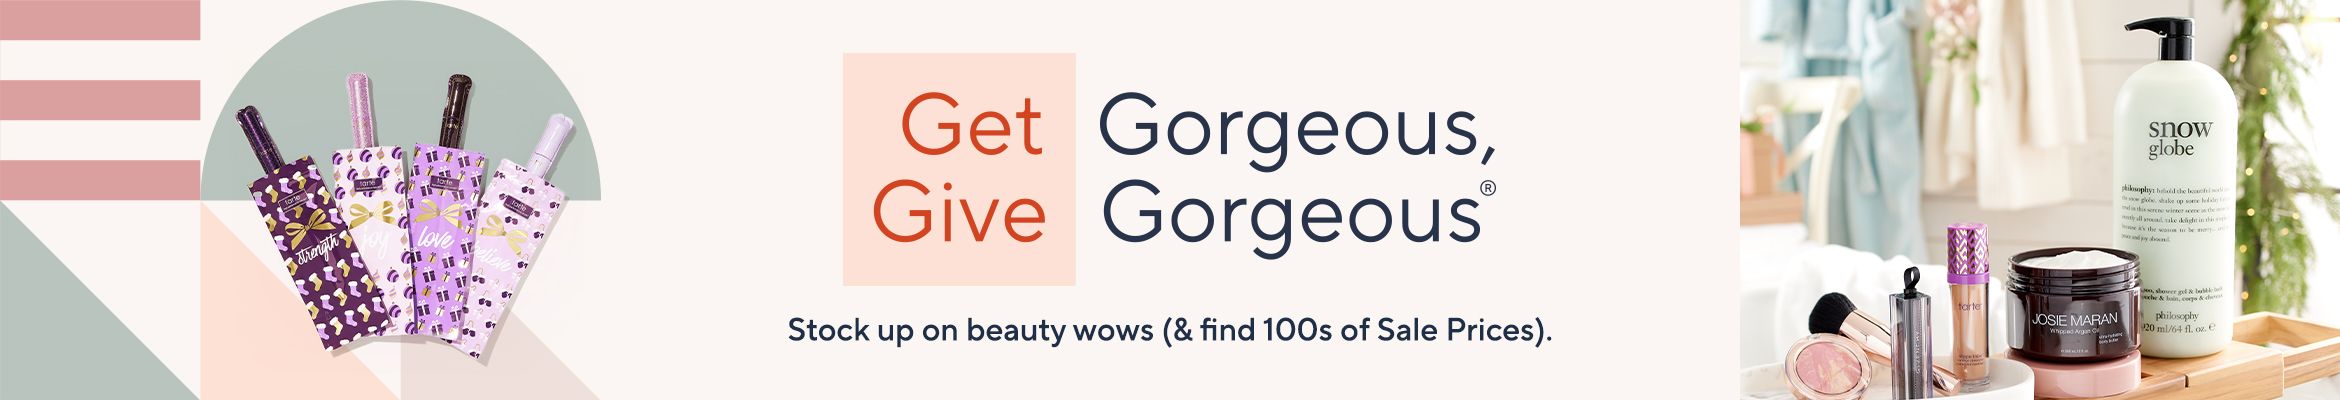 Get Gorgeous, Give Gorgeous® - Stock up on beauty wows (& find 100s of Sale Prices).